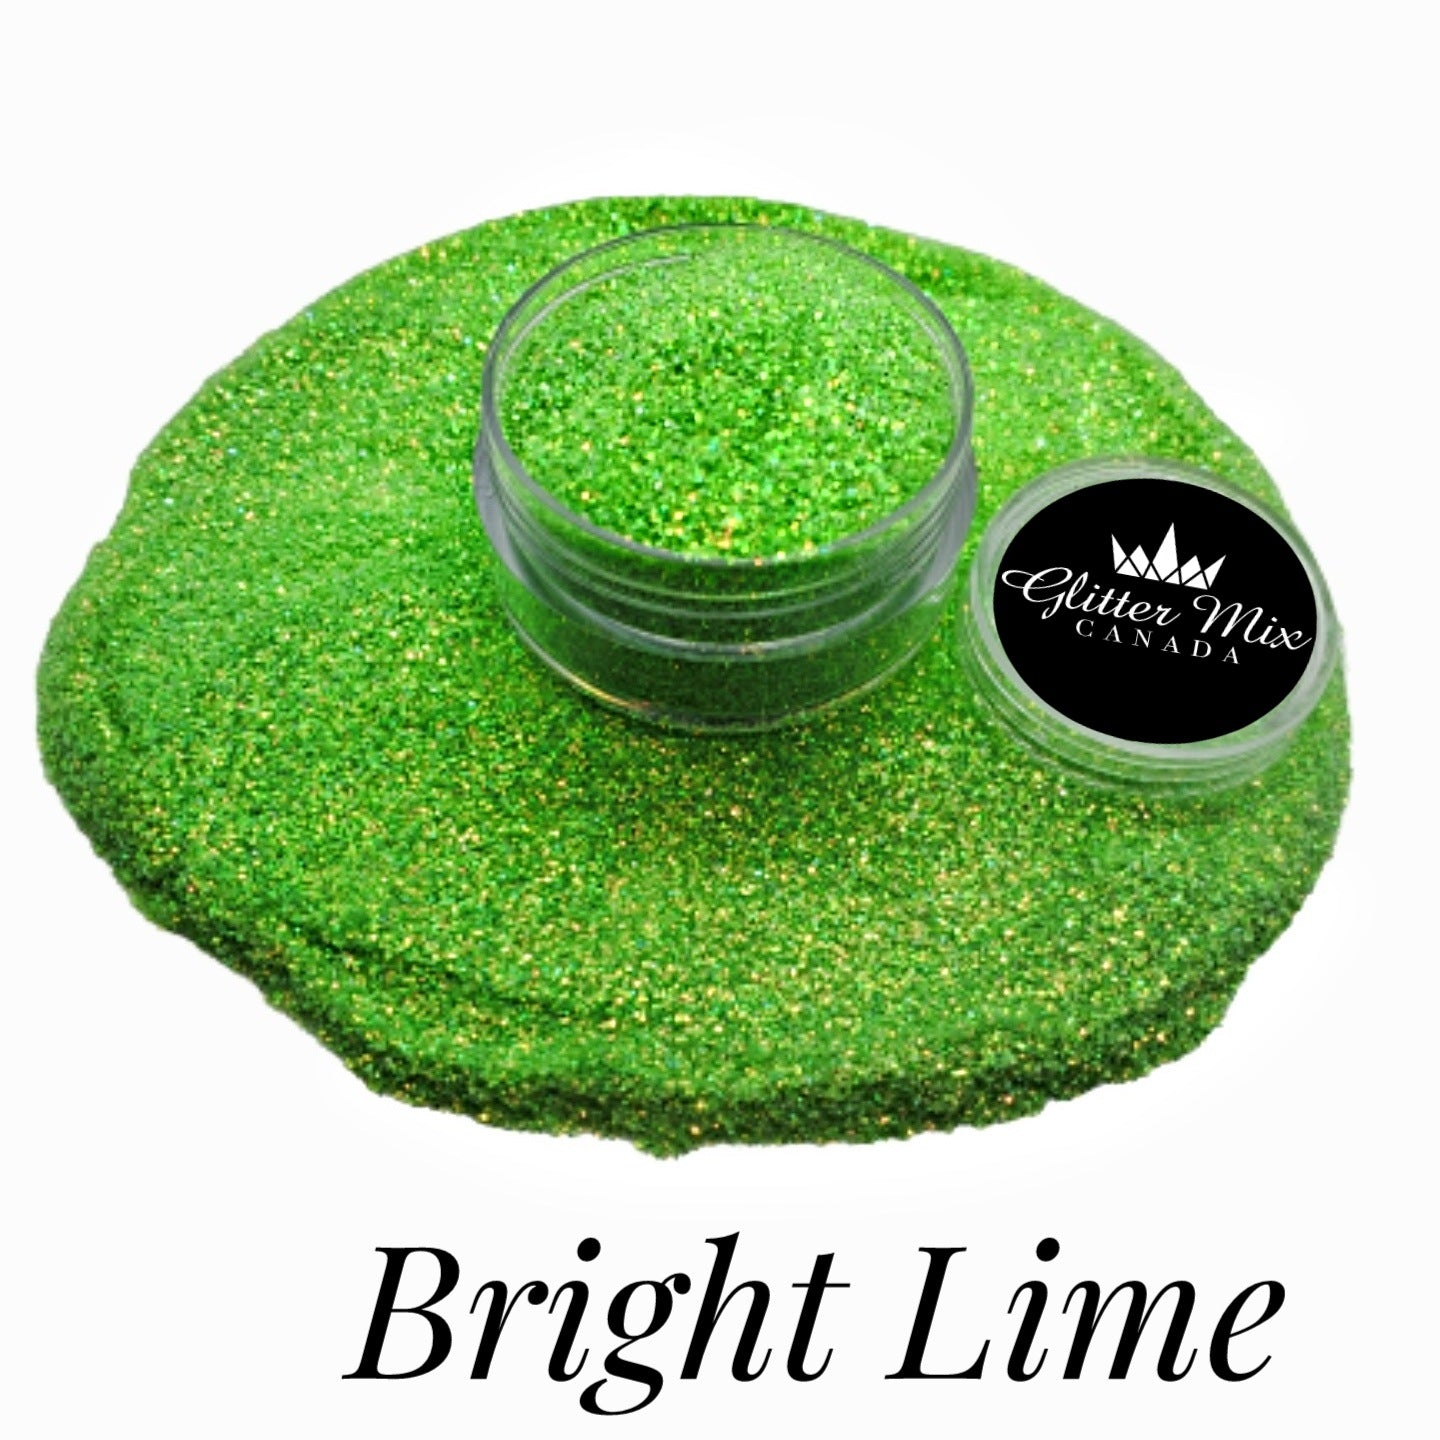 395-Bright lime 10g